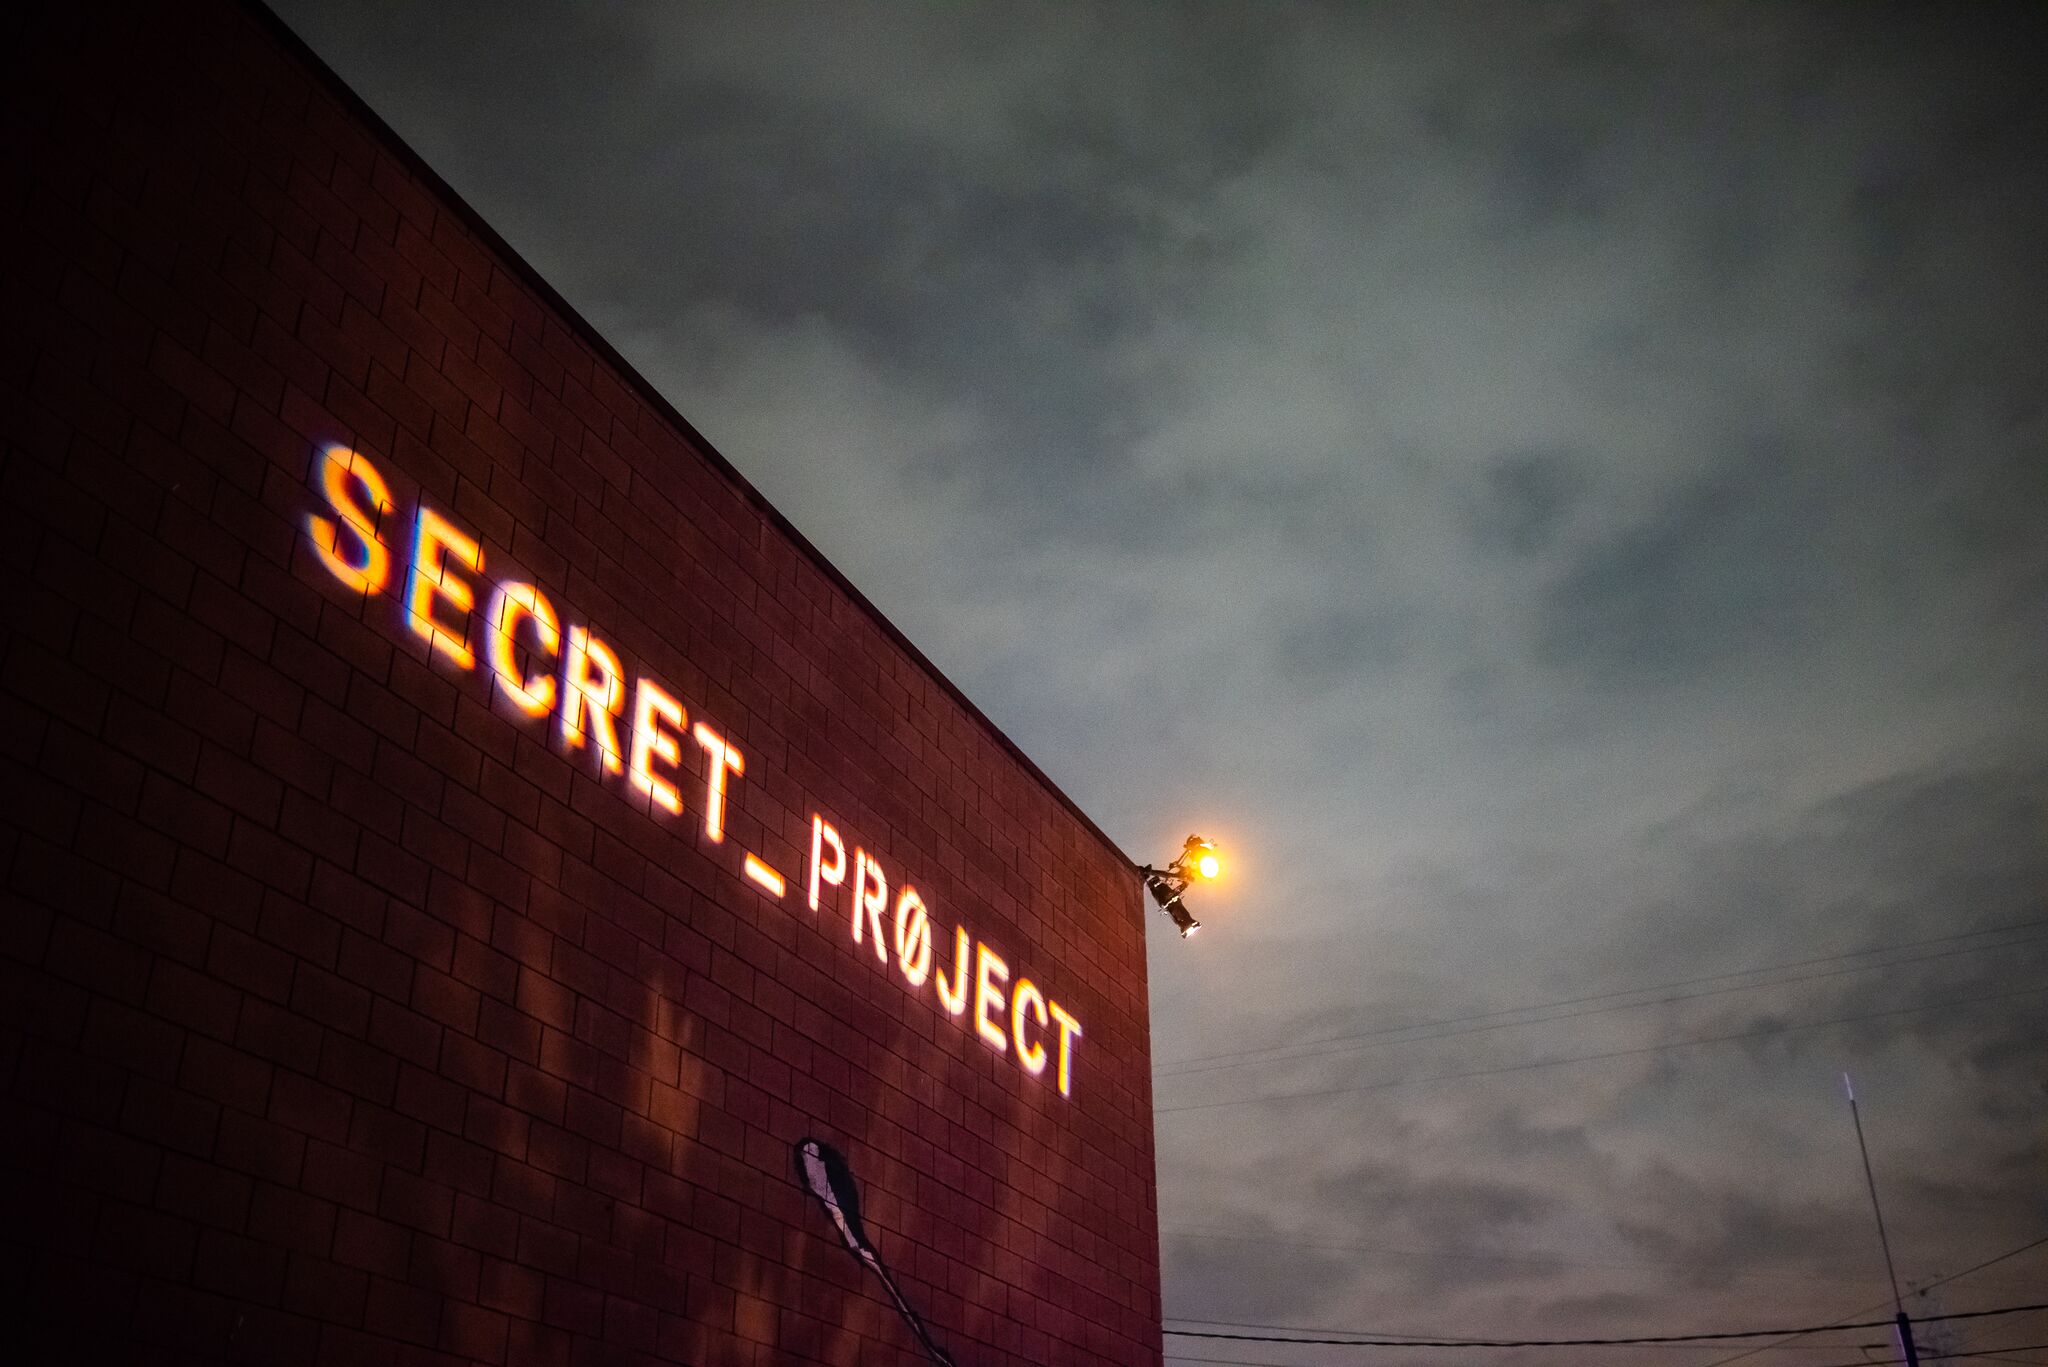 Secret Project Brings Light to the Underground Scene [Event Review]